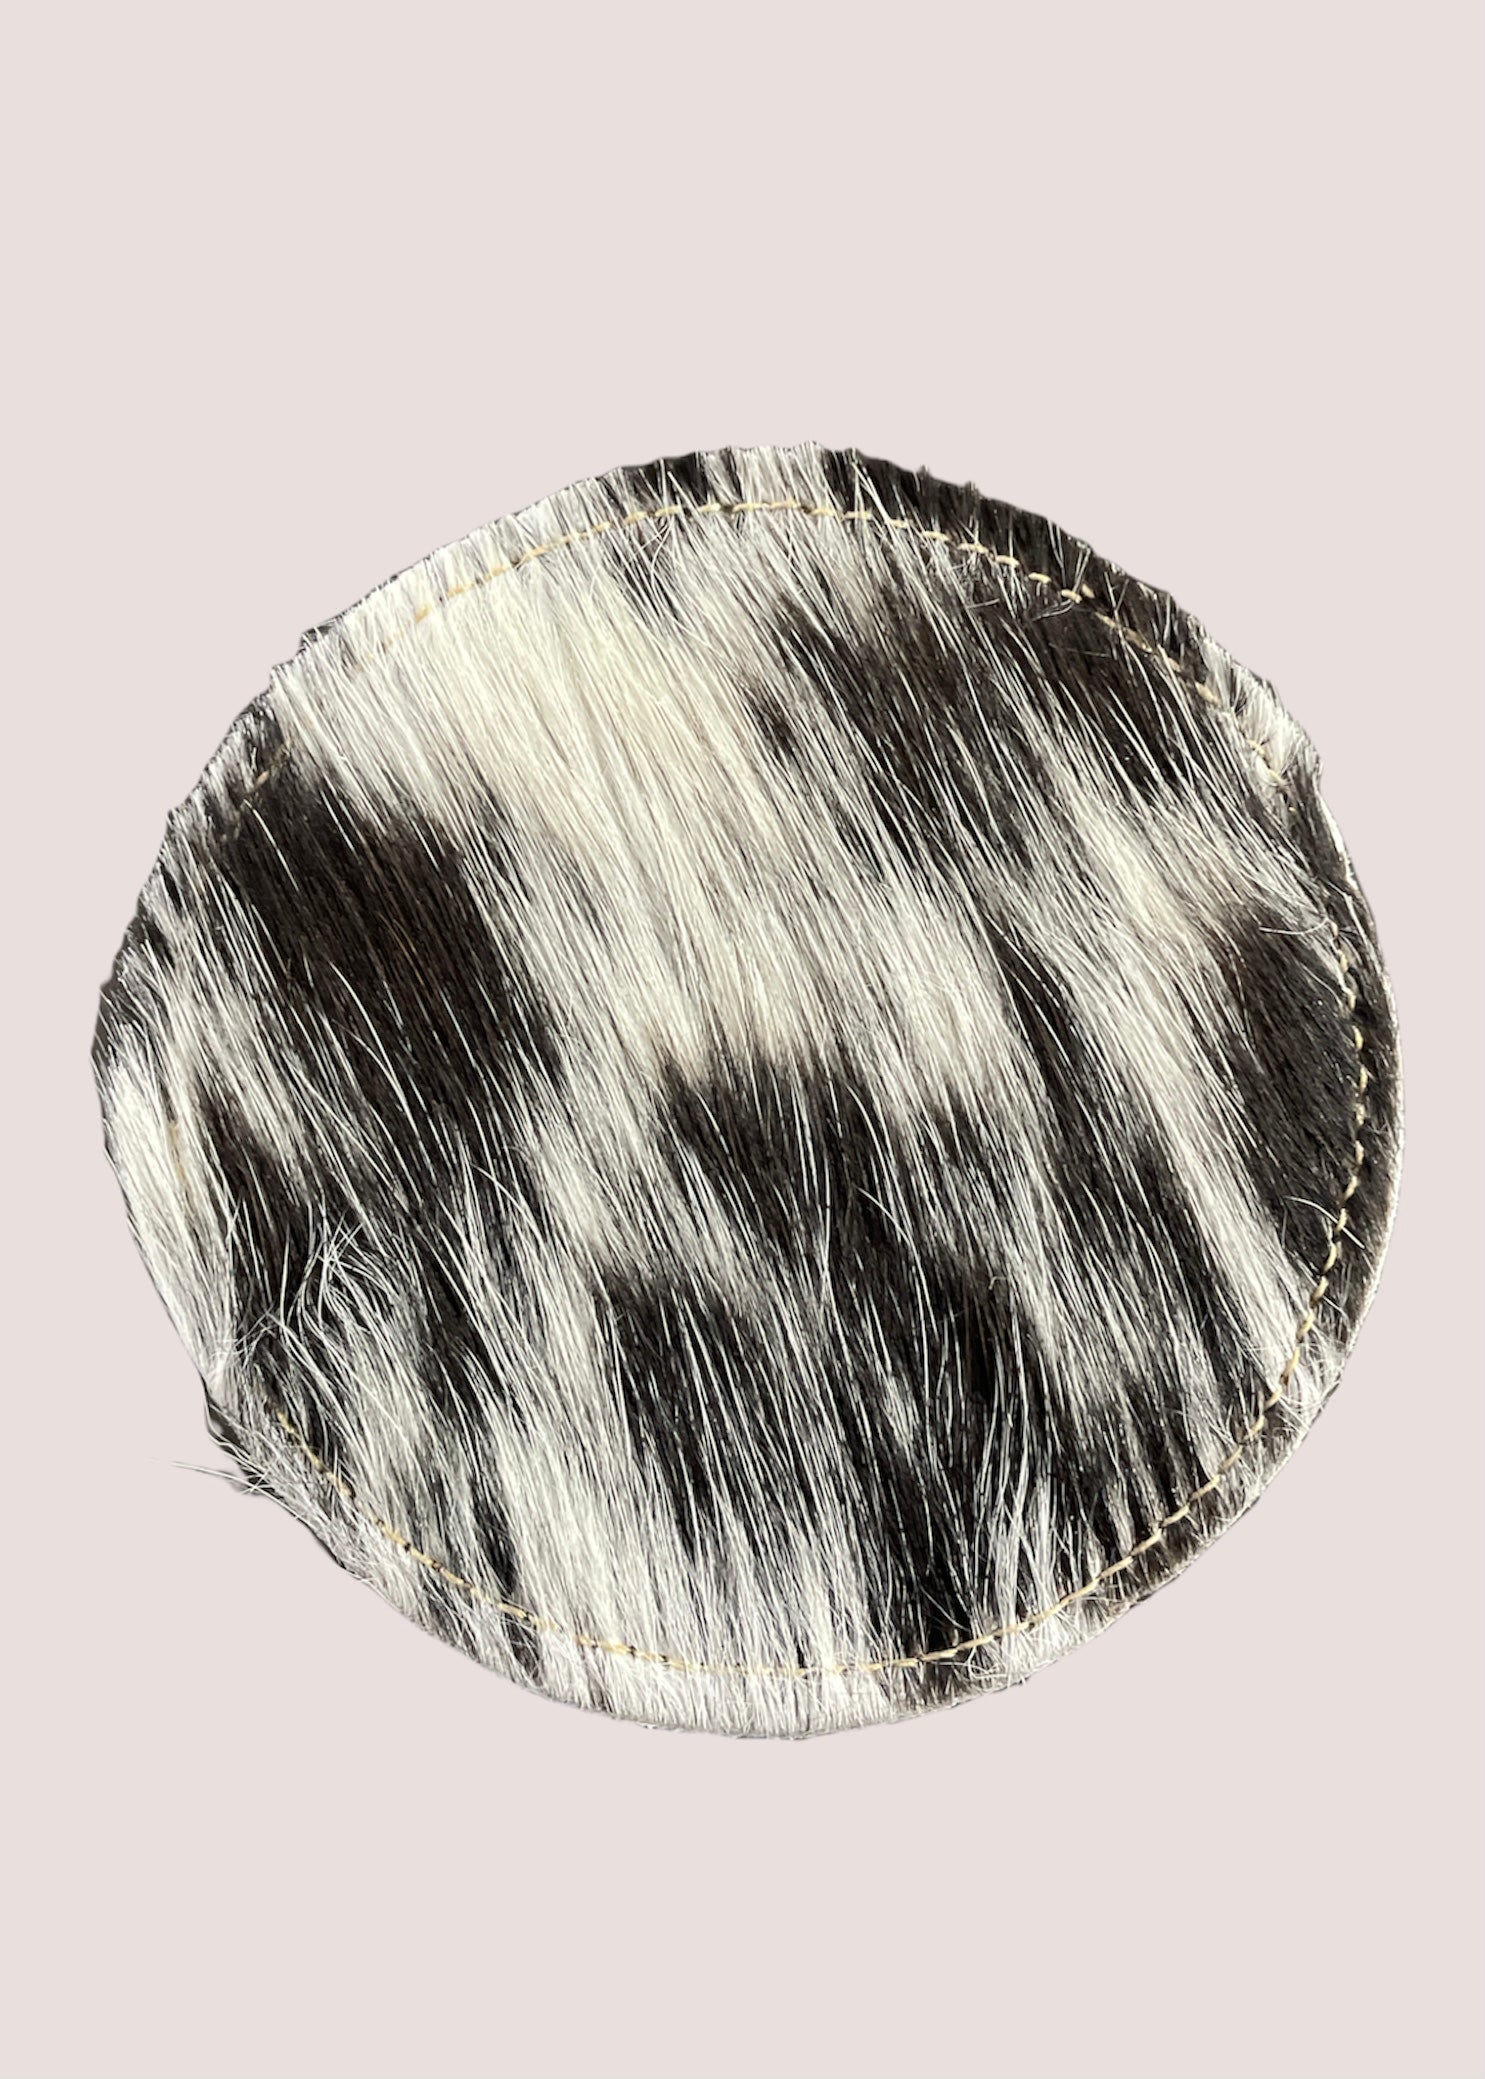 Cowhide Coaster- Black and White